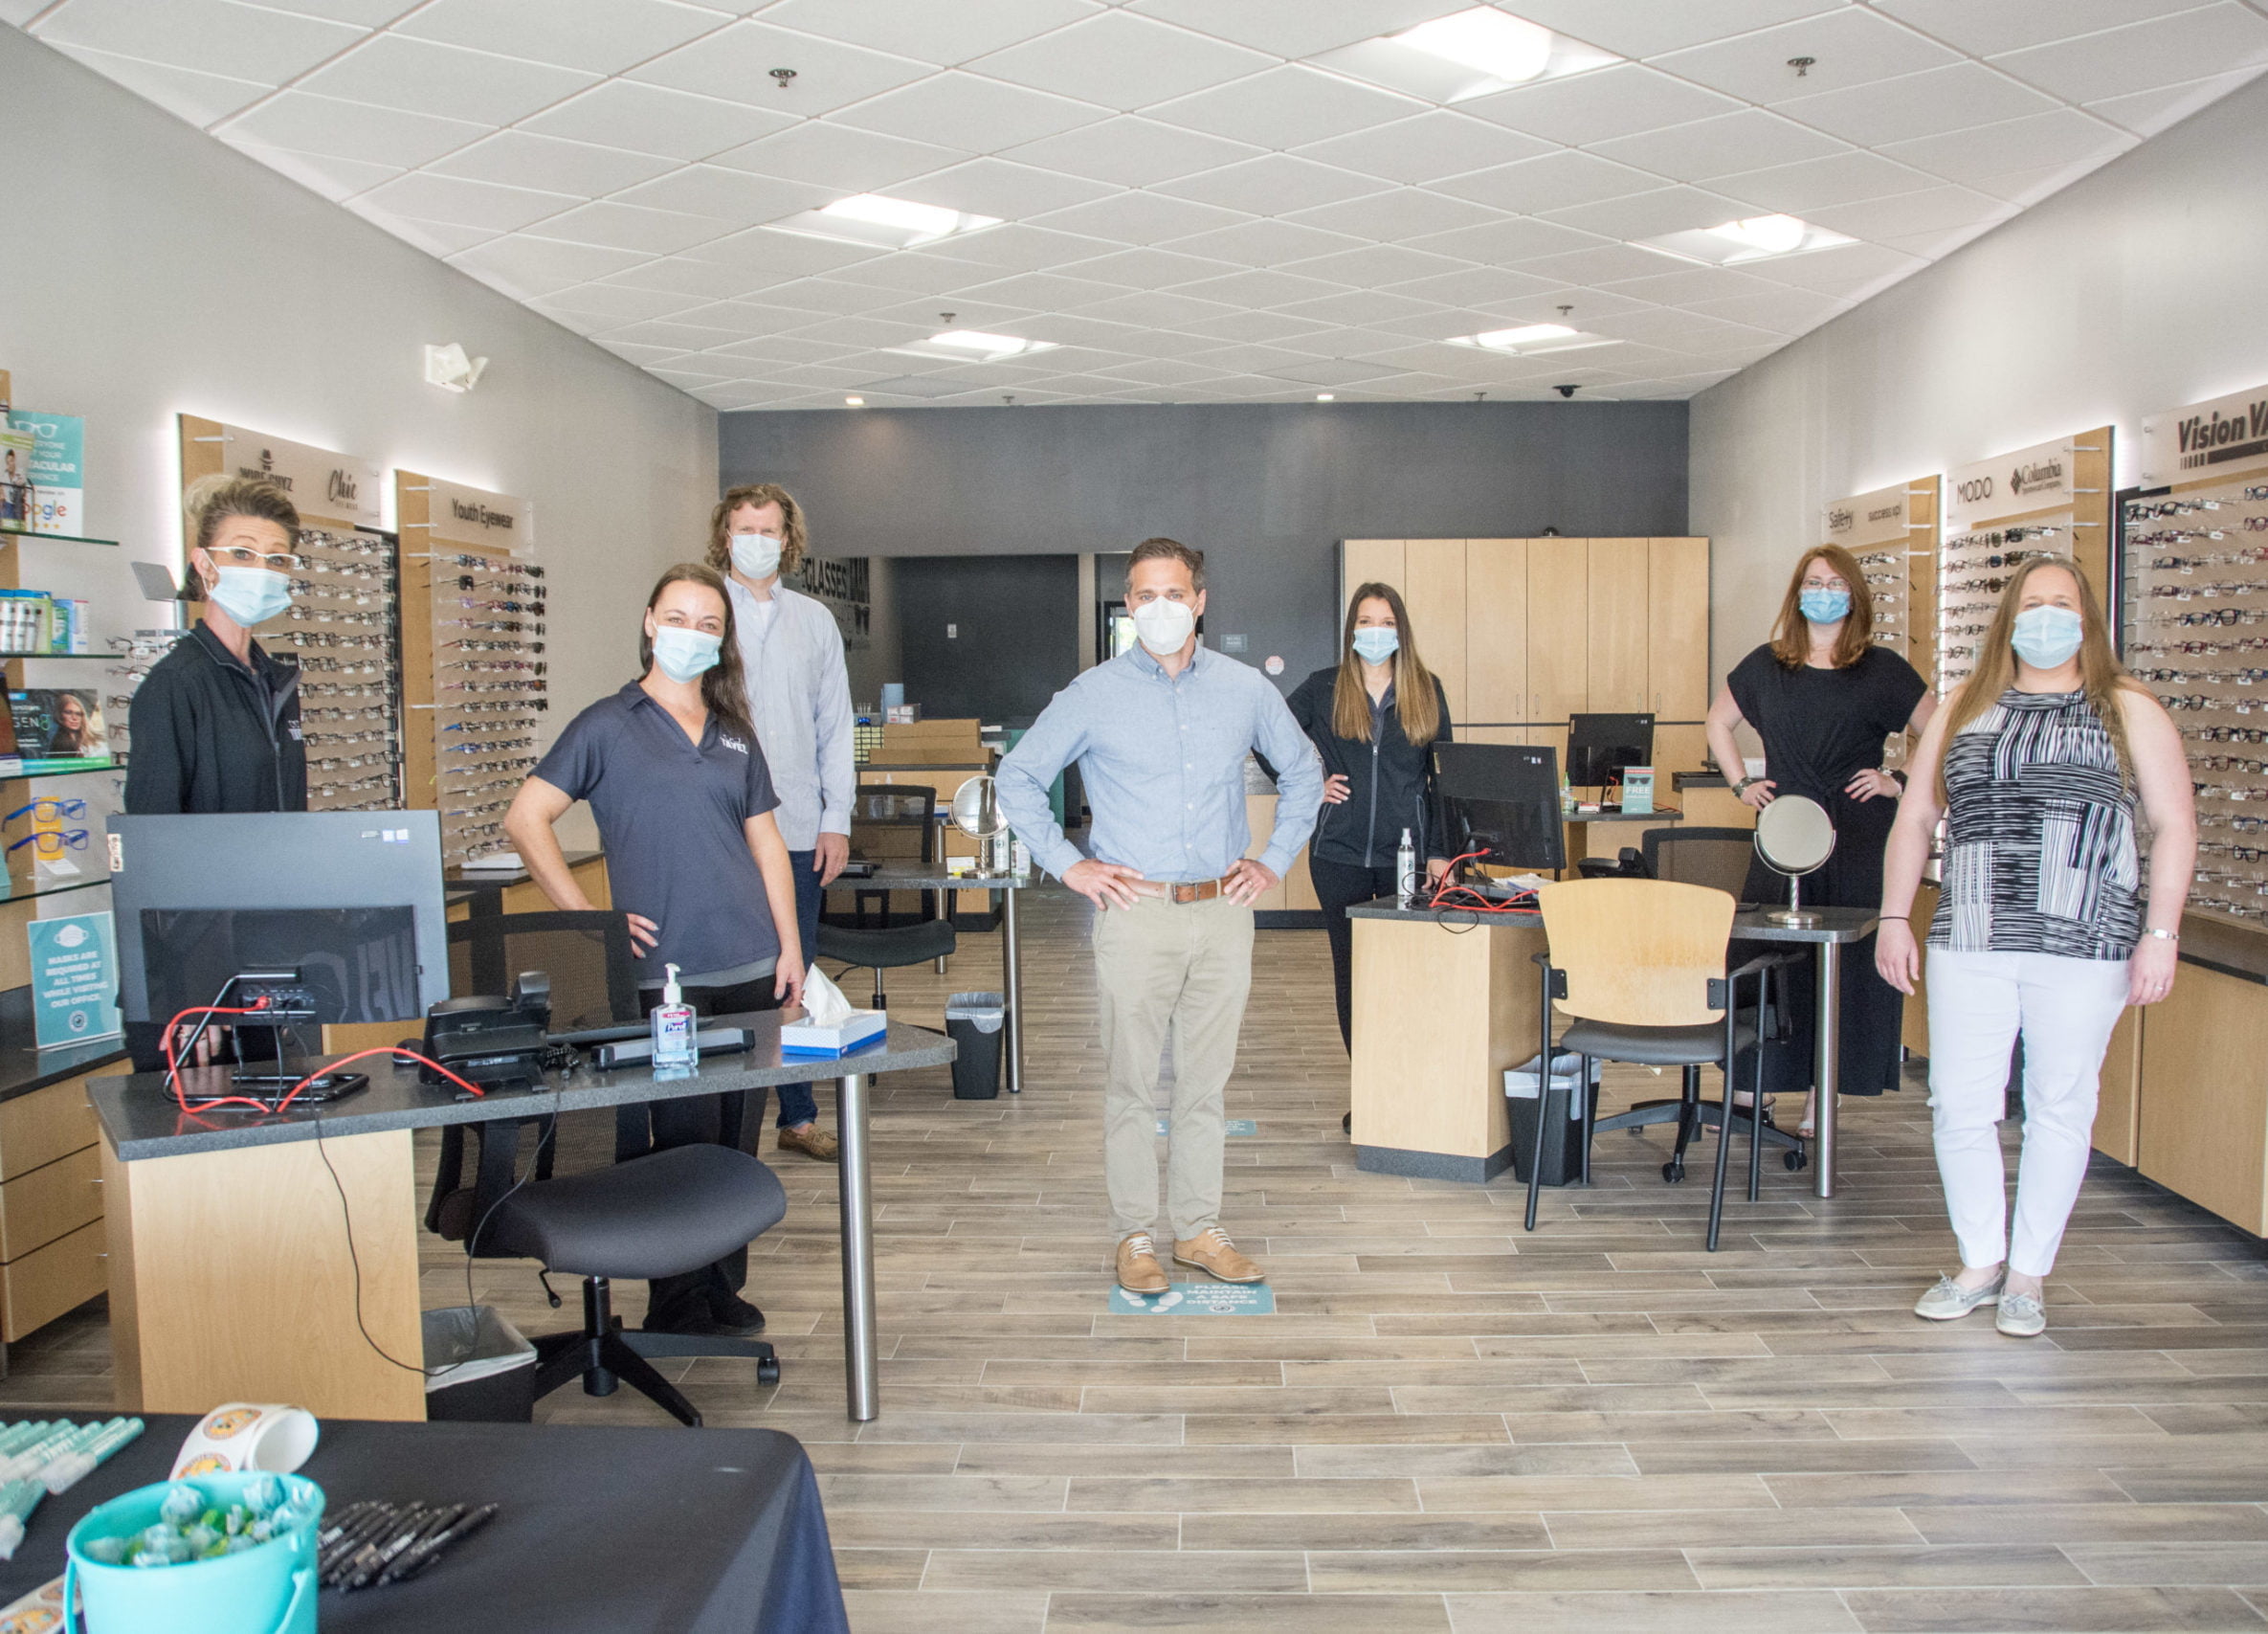 Dr. Tavel staff wearing PPE at the new store